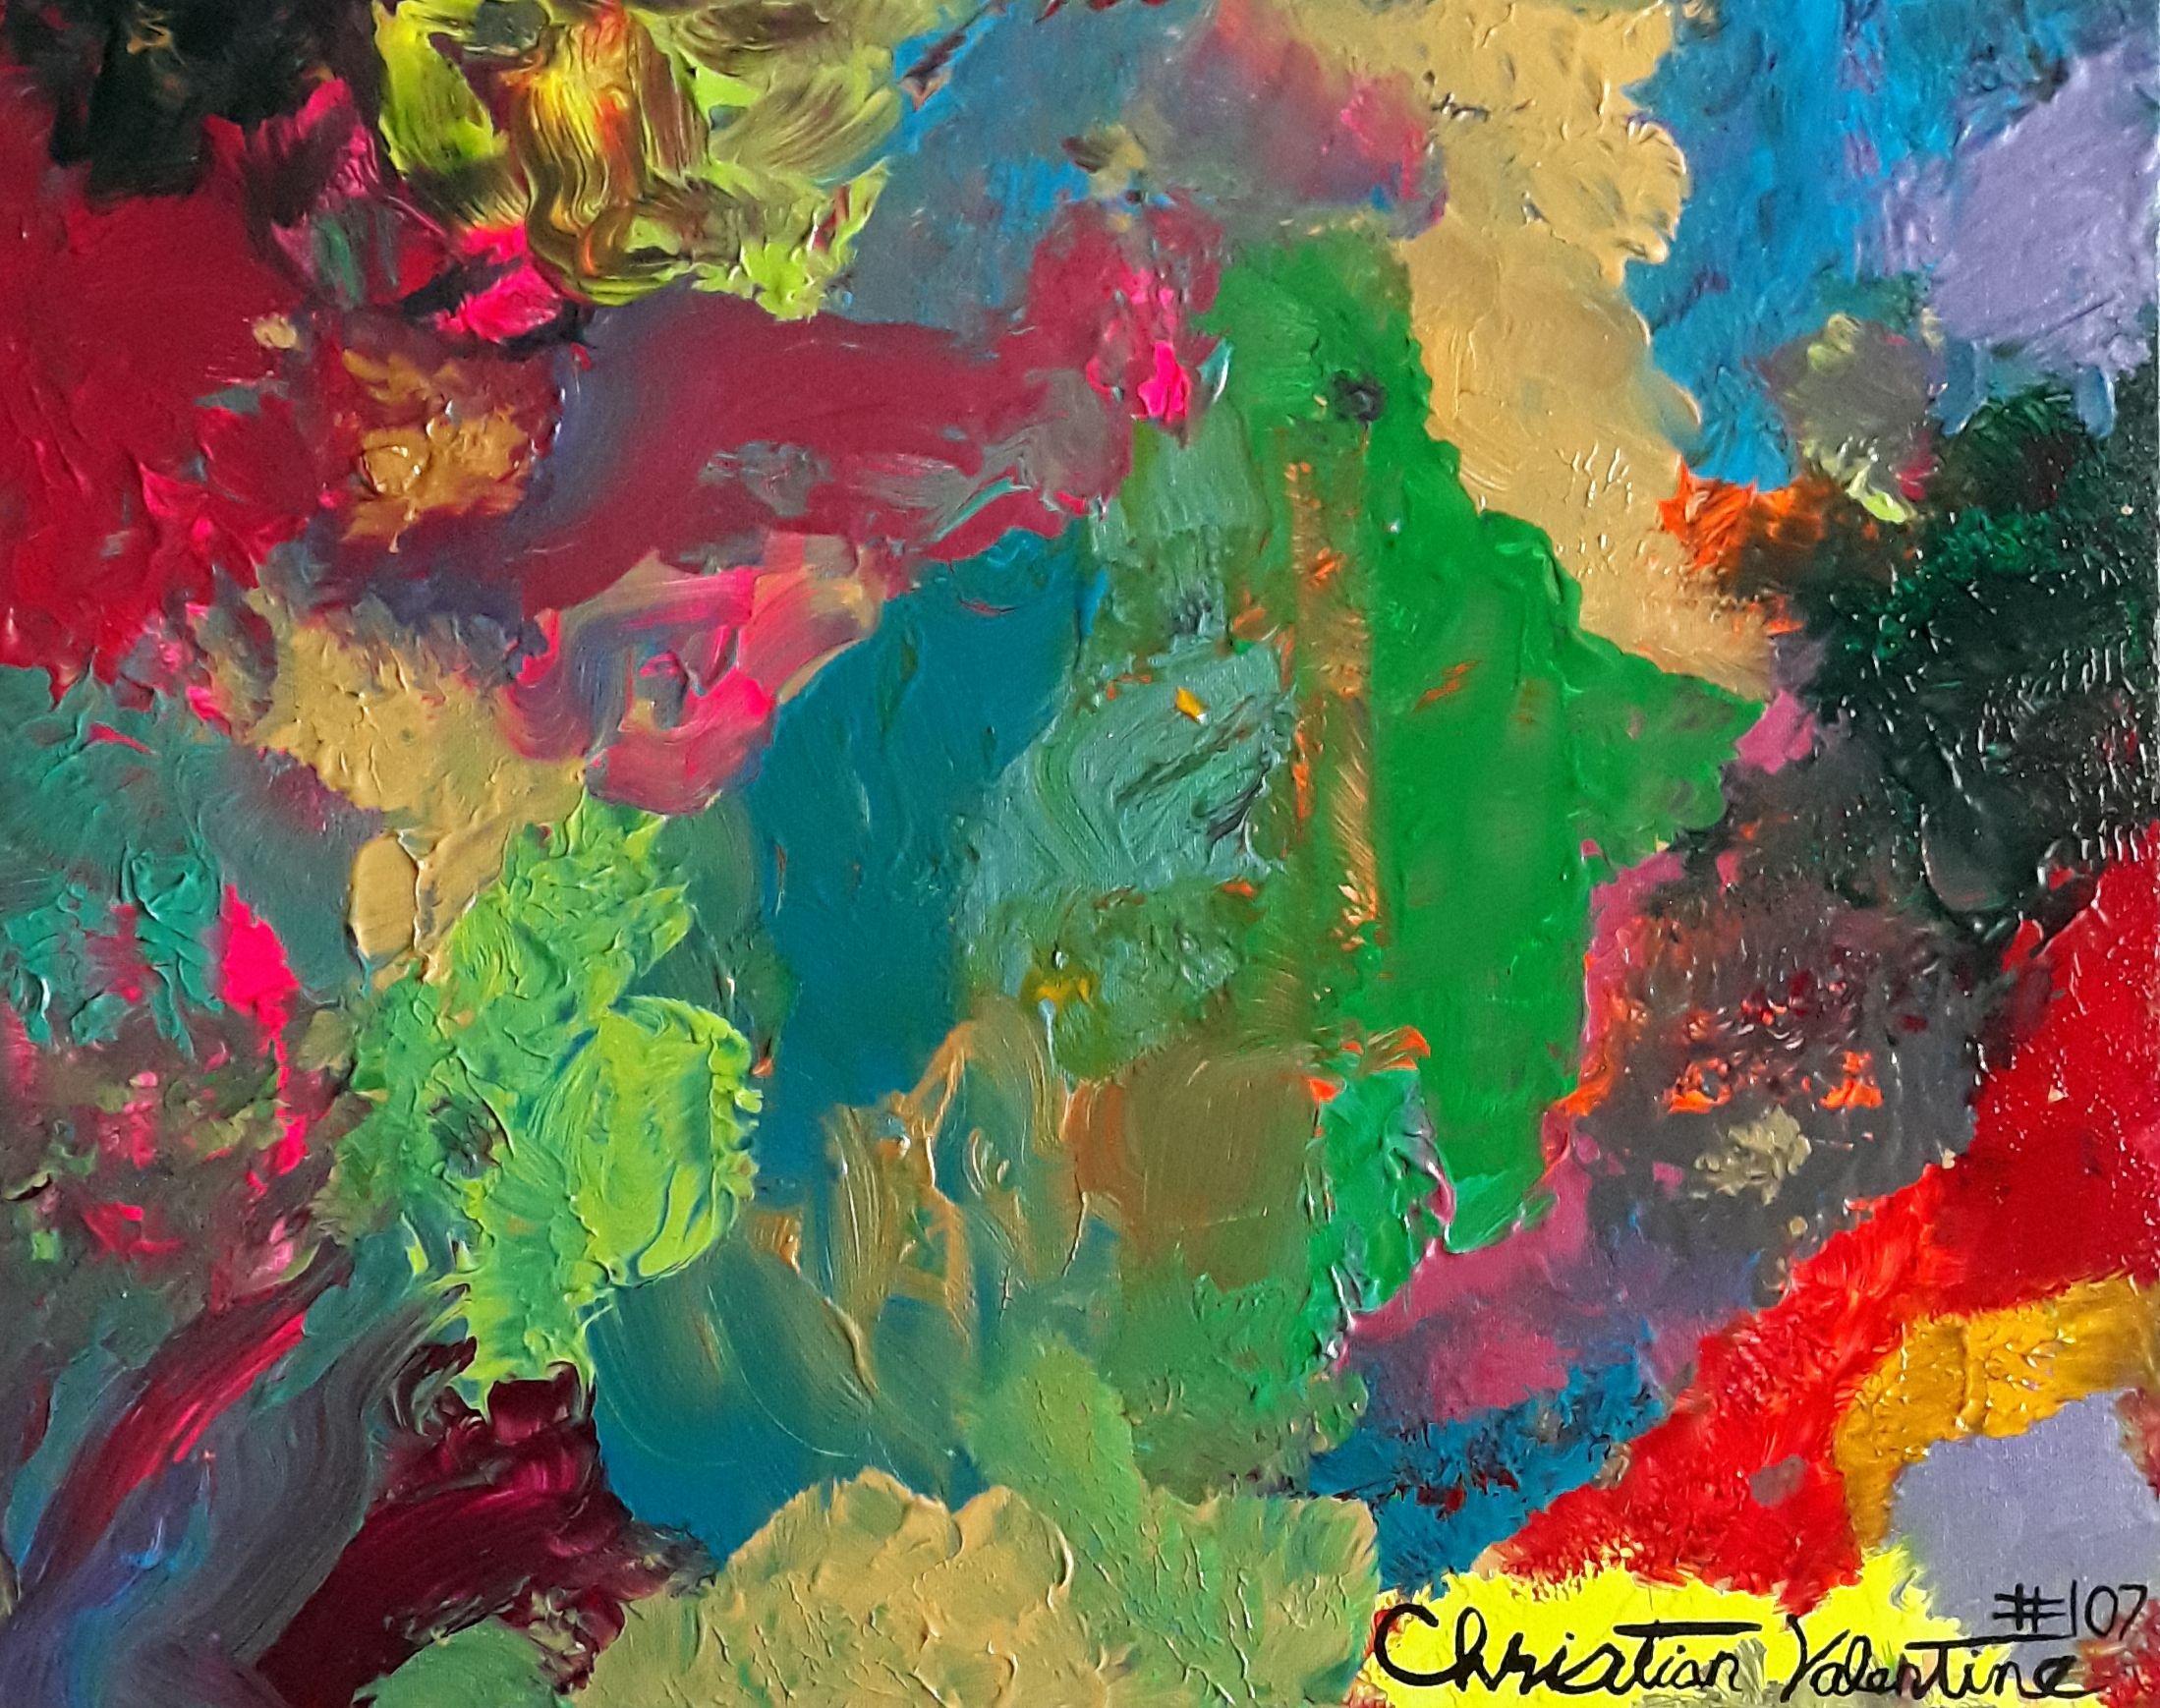 Christian Valentine Abstract Painting - Ancient Hawaii, Painting, Acrylic on Canvas